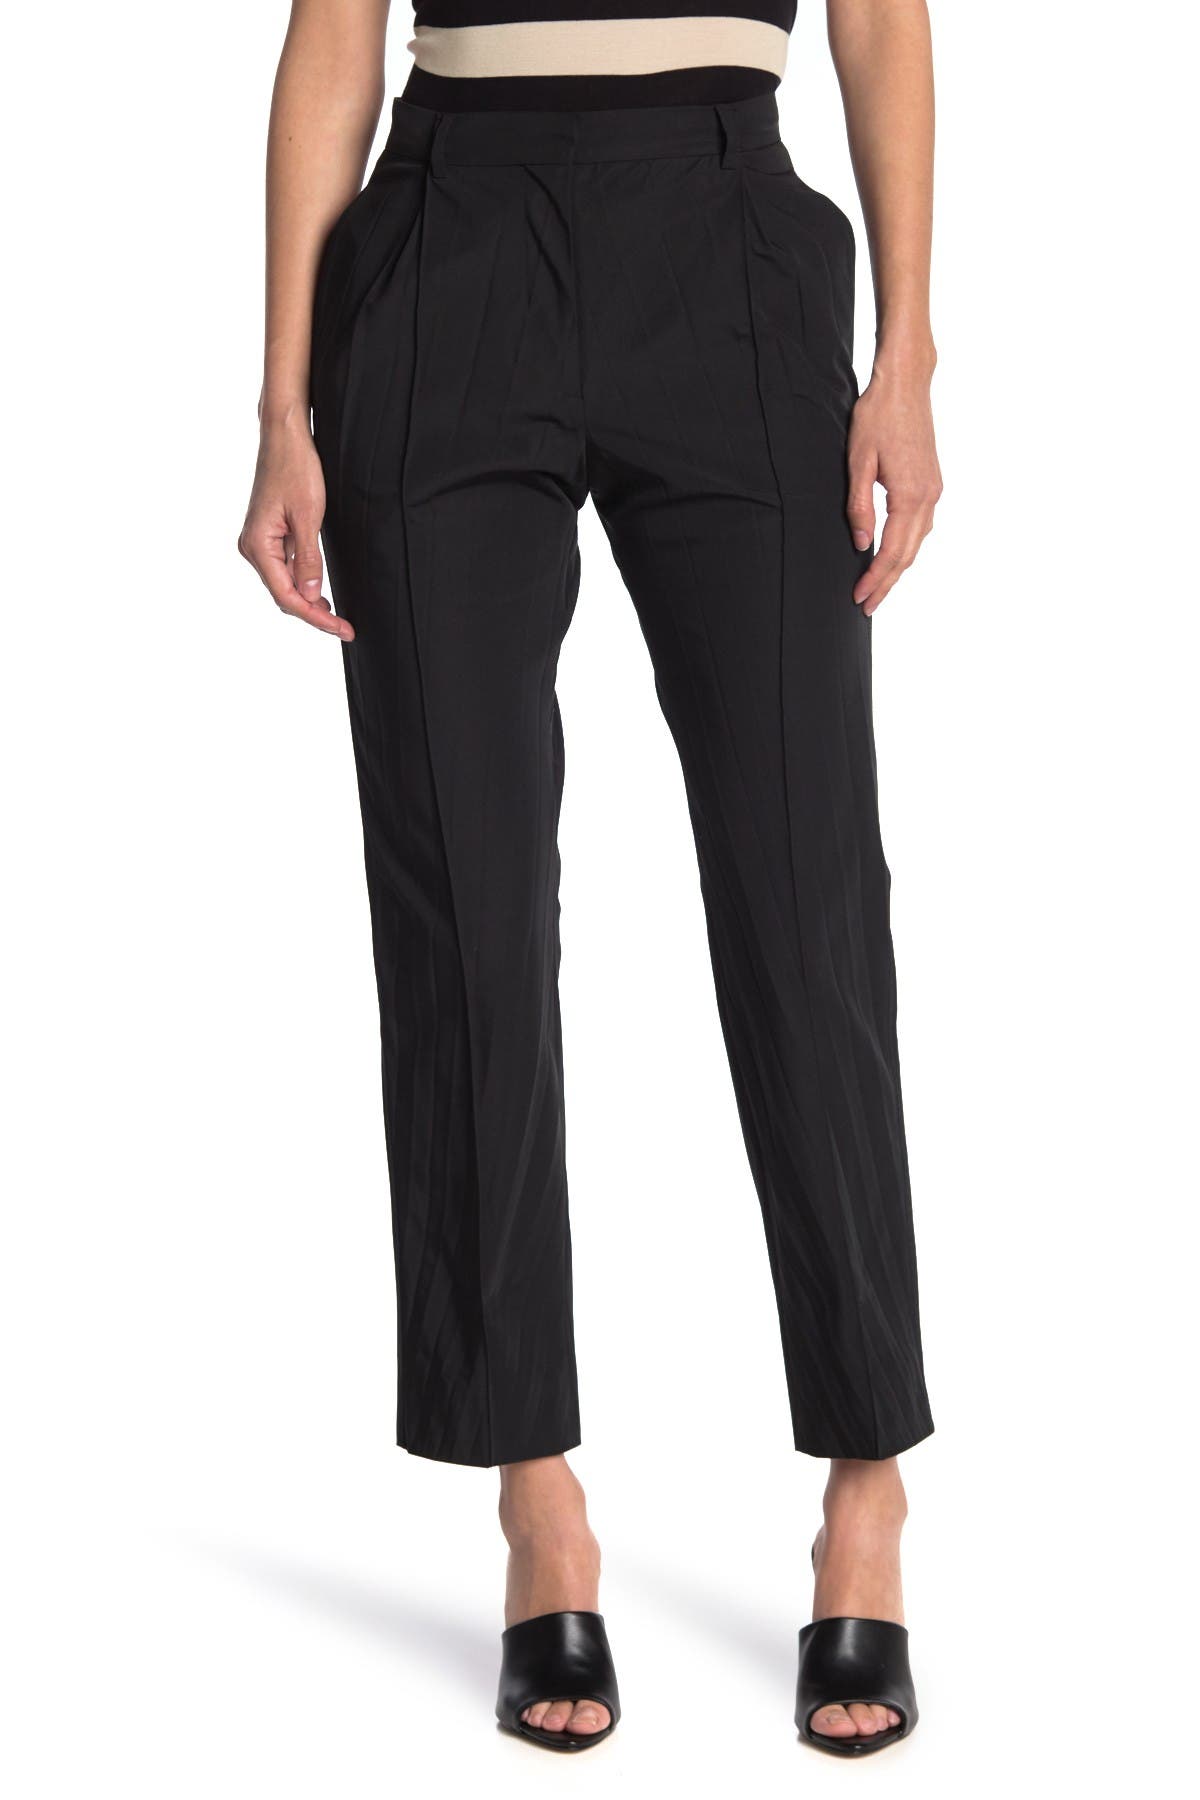 VALENTINO SOLID PLEATED PANTS,8053341818331